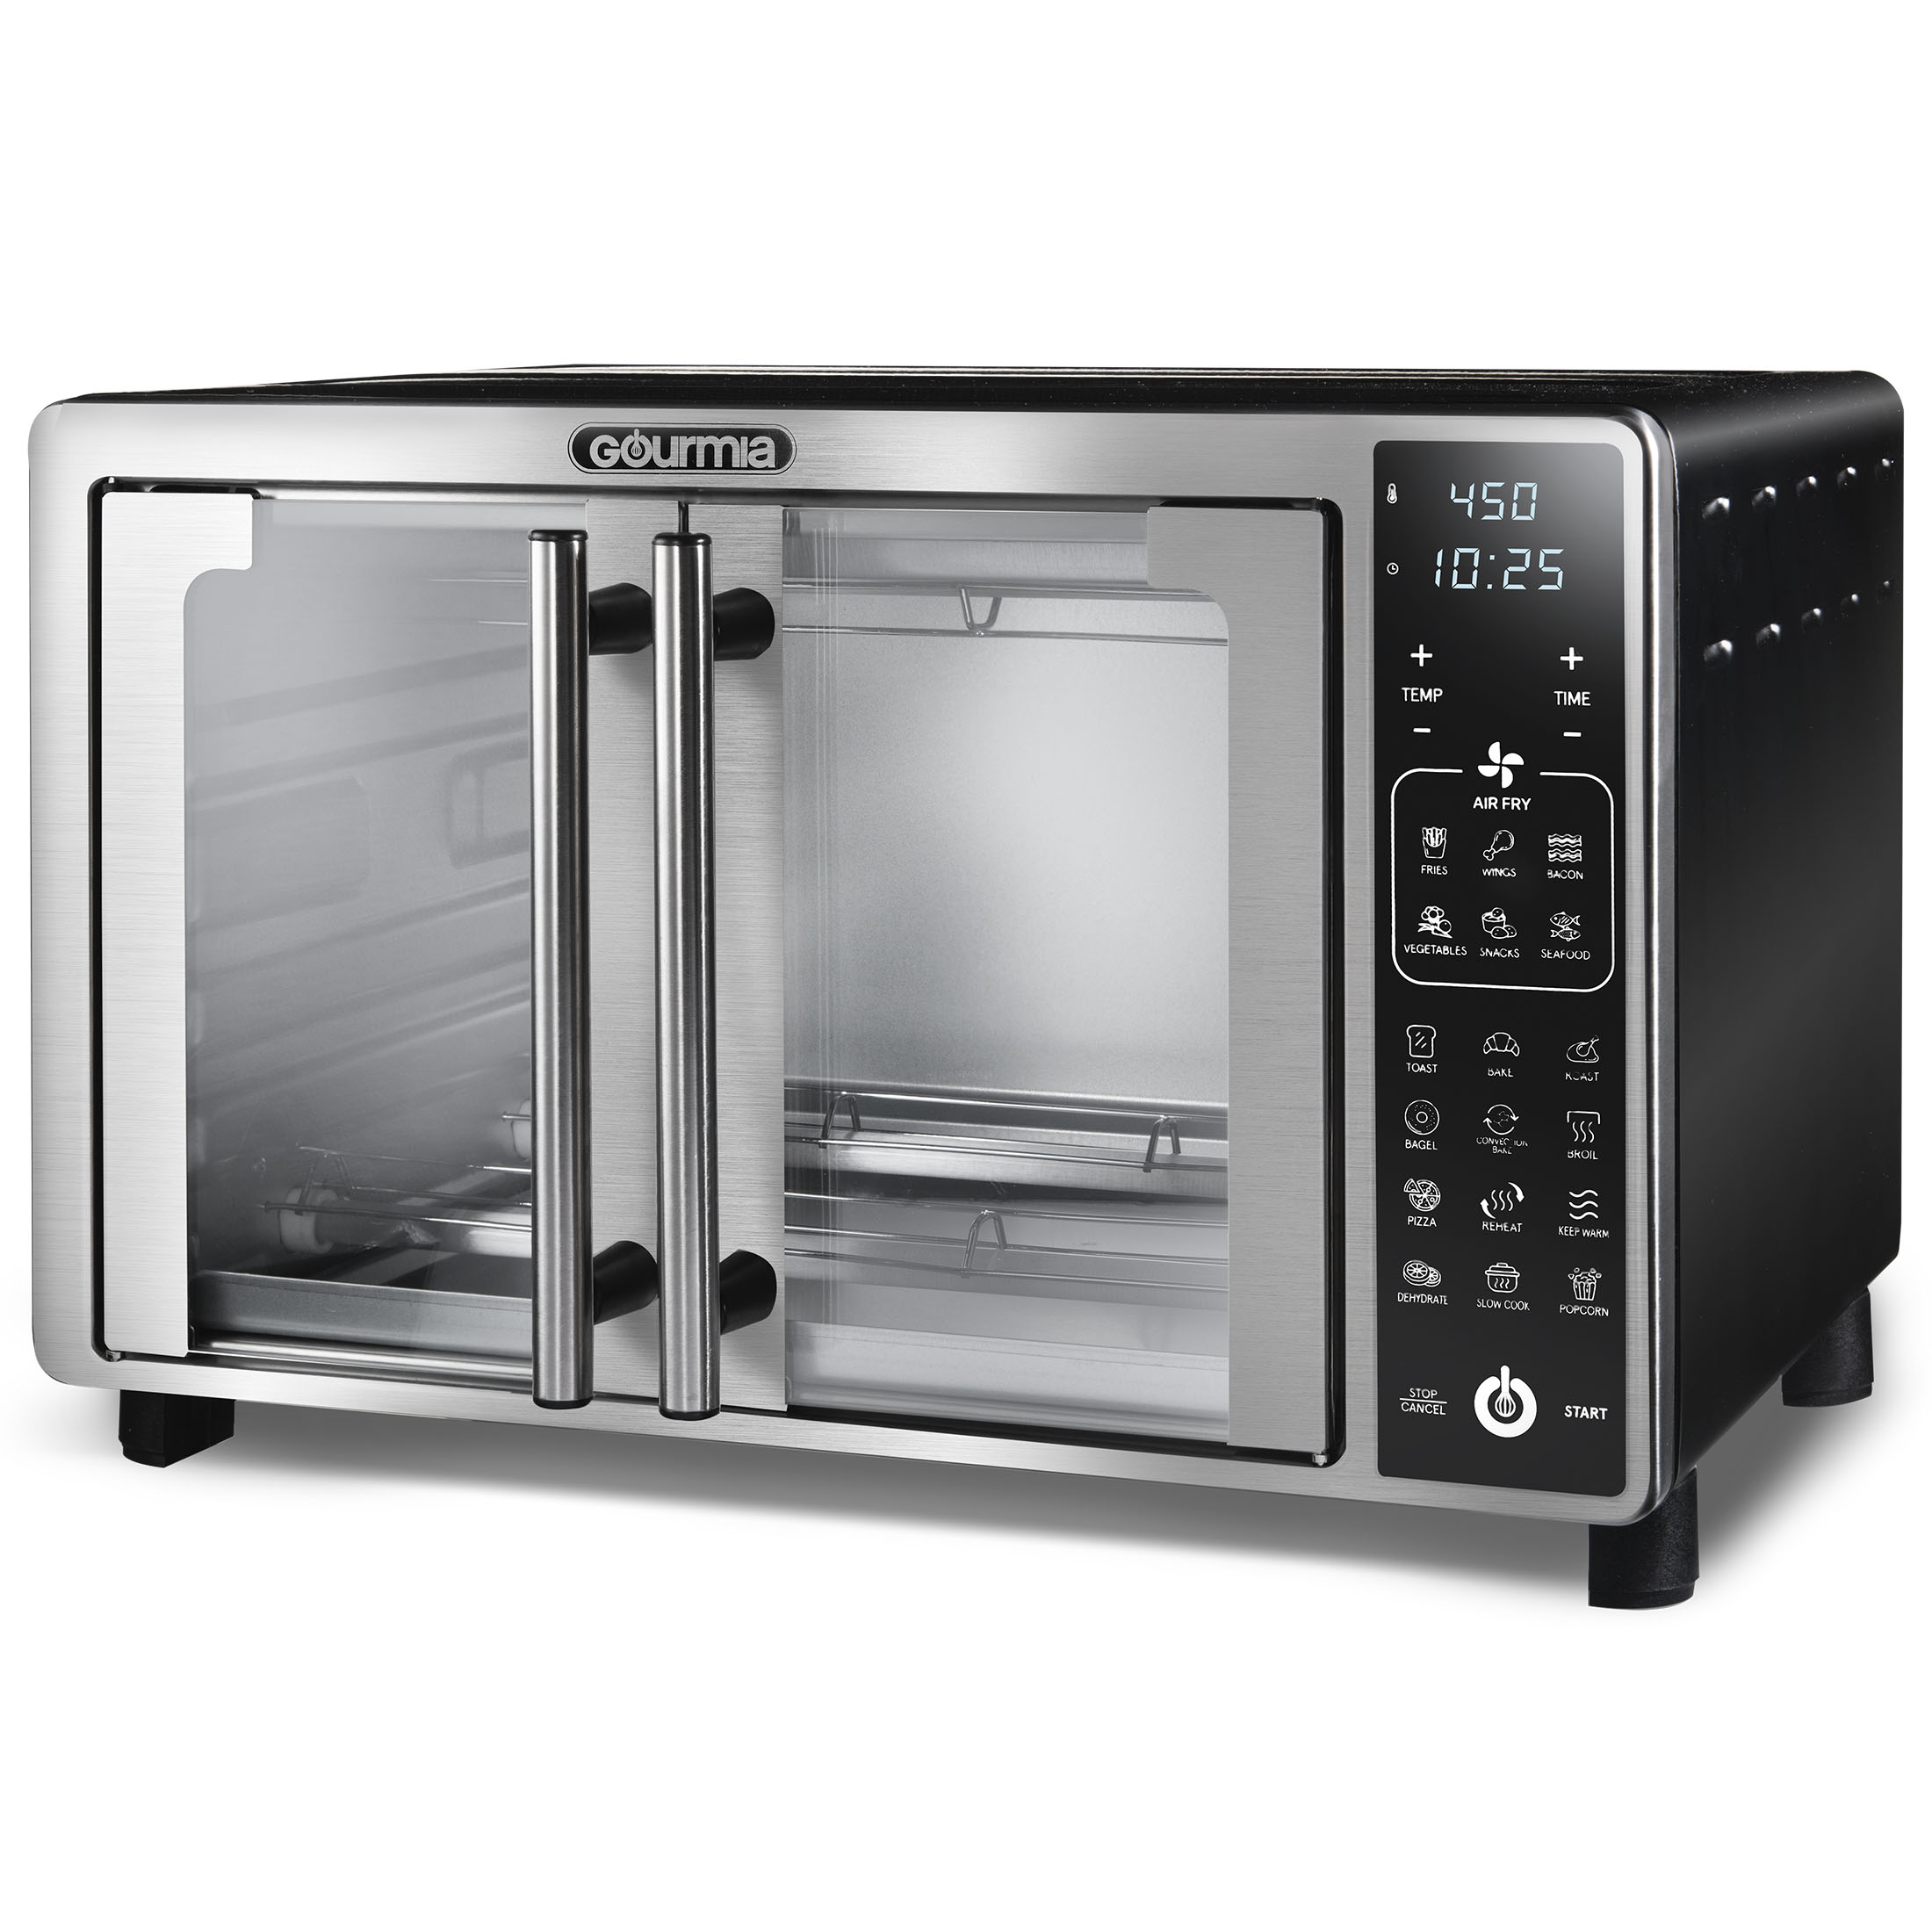 Gourmia Digital Air Fryer Toaster Oven with Single-Pull French Doors, New - image 6 of 7